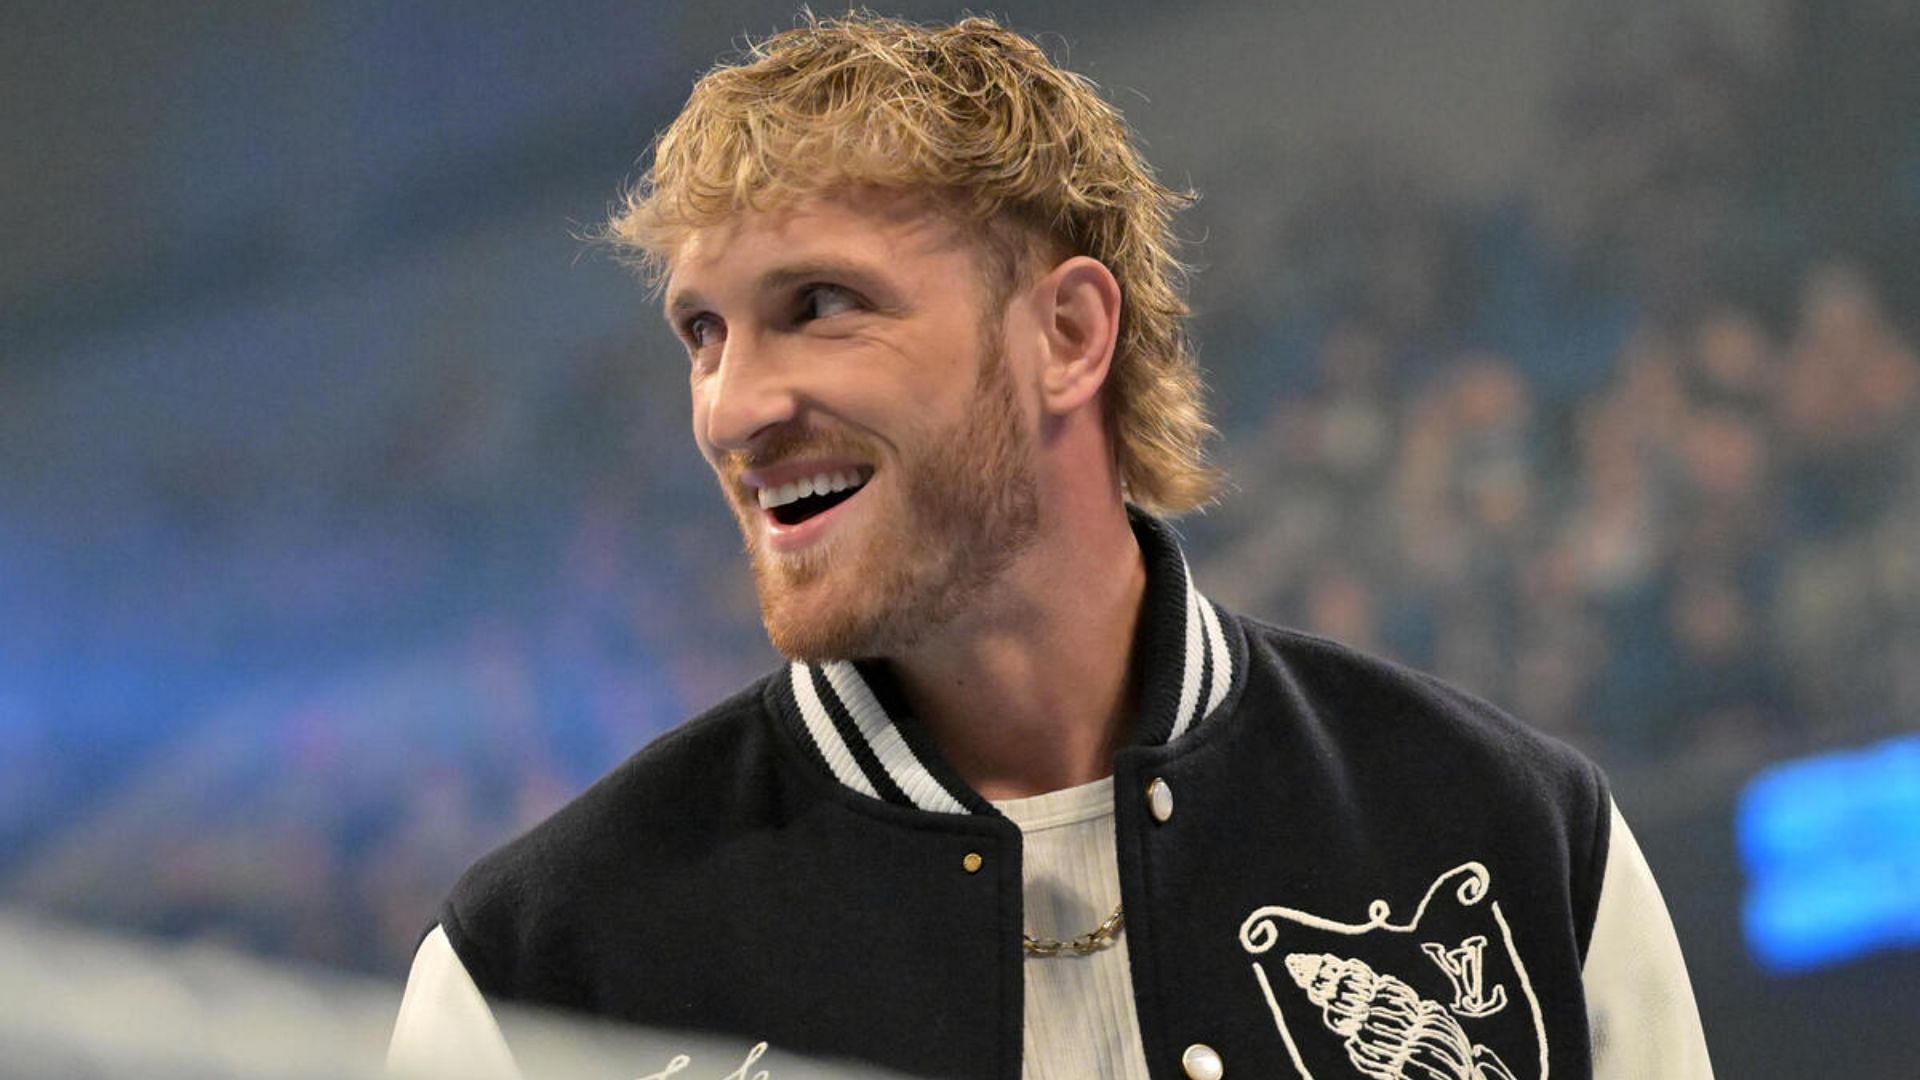 Logan Paul will be competing at WWE King and Queen of the Ring (Image credit: WWE)